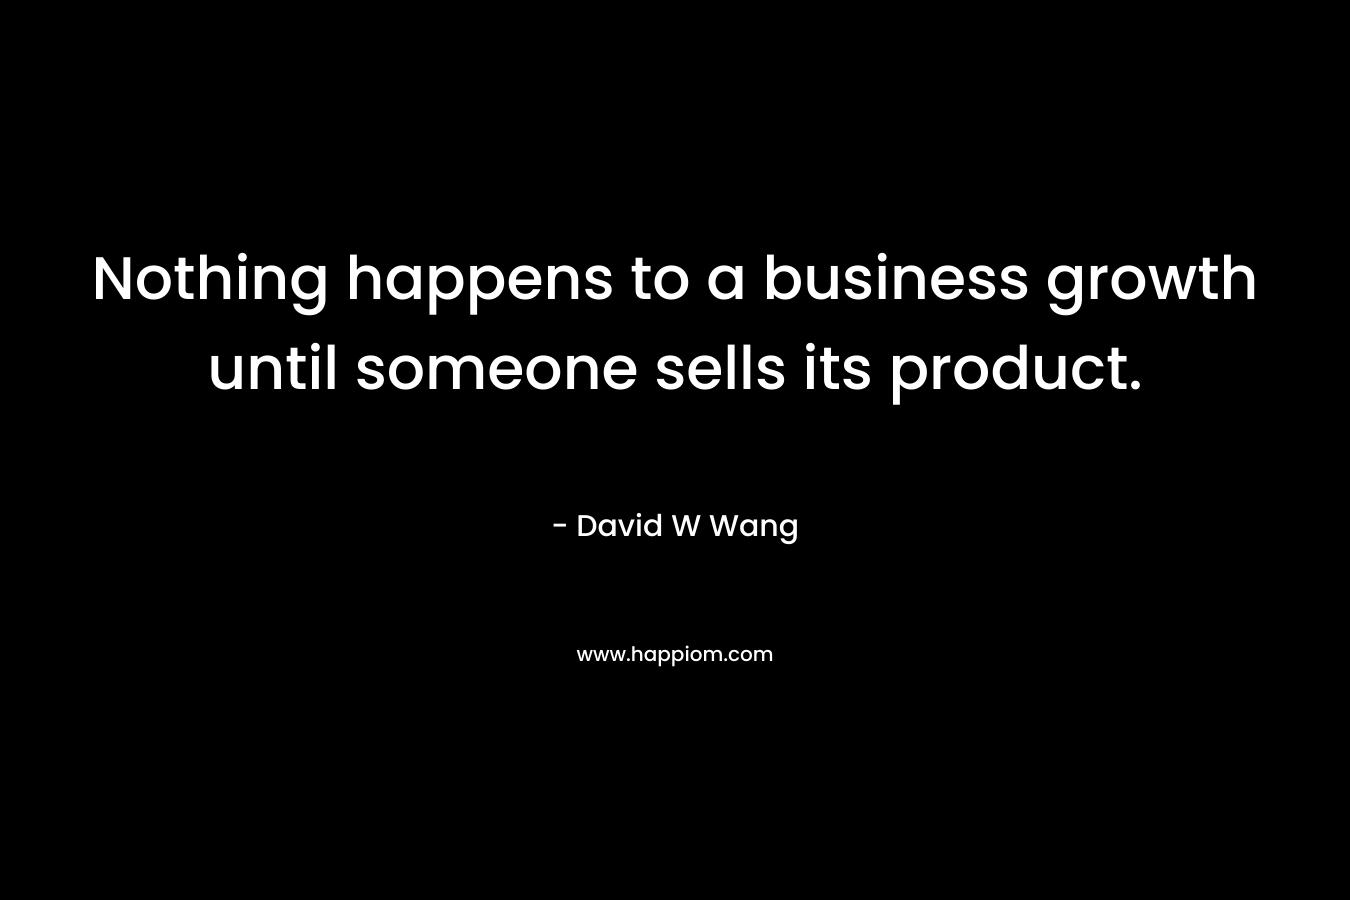 Nothing happens to a business growth until someone sells its product. – David W Wang